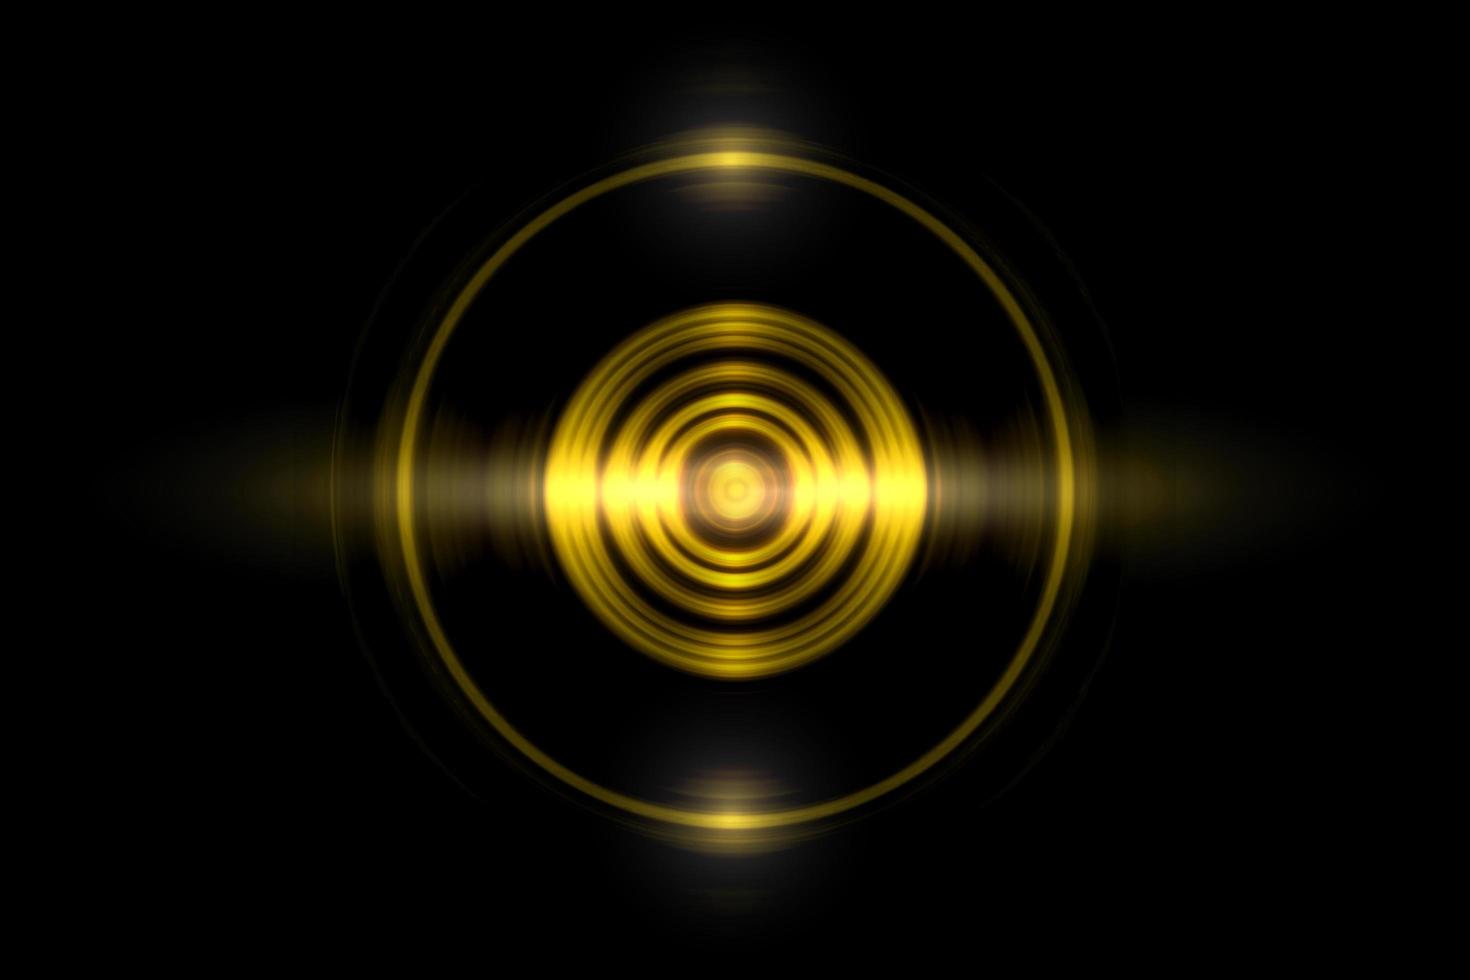 Abstract gold circle ring light effect with sound waves oscillating on black background photo